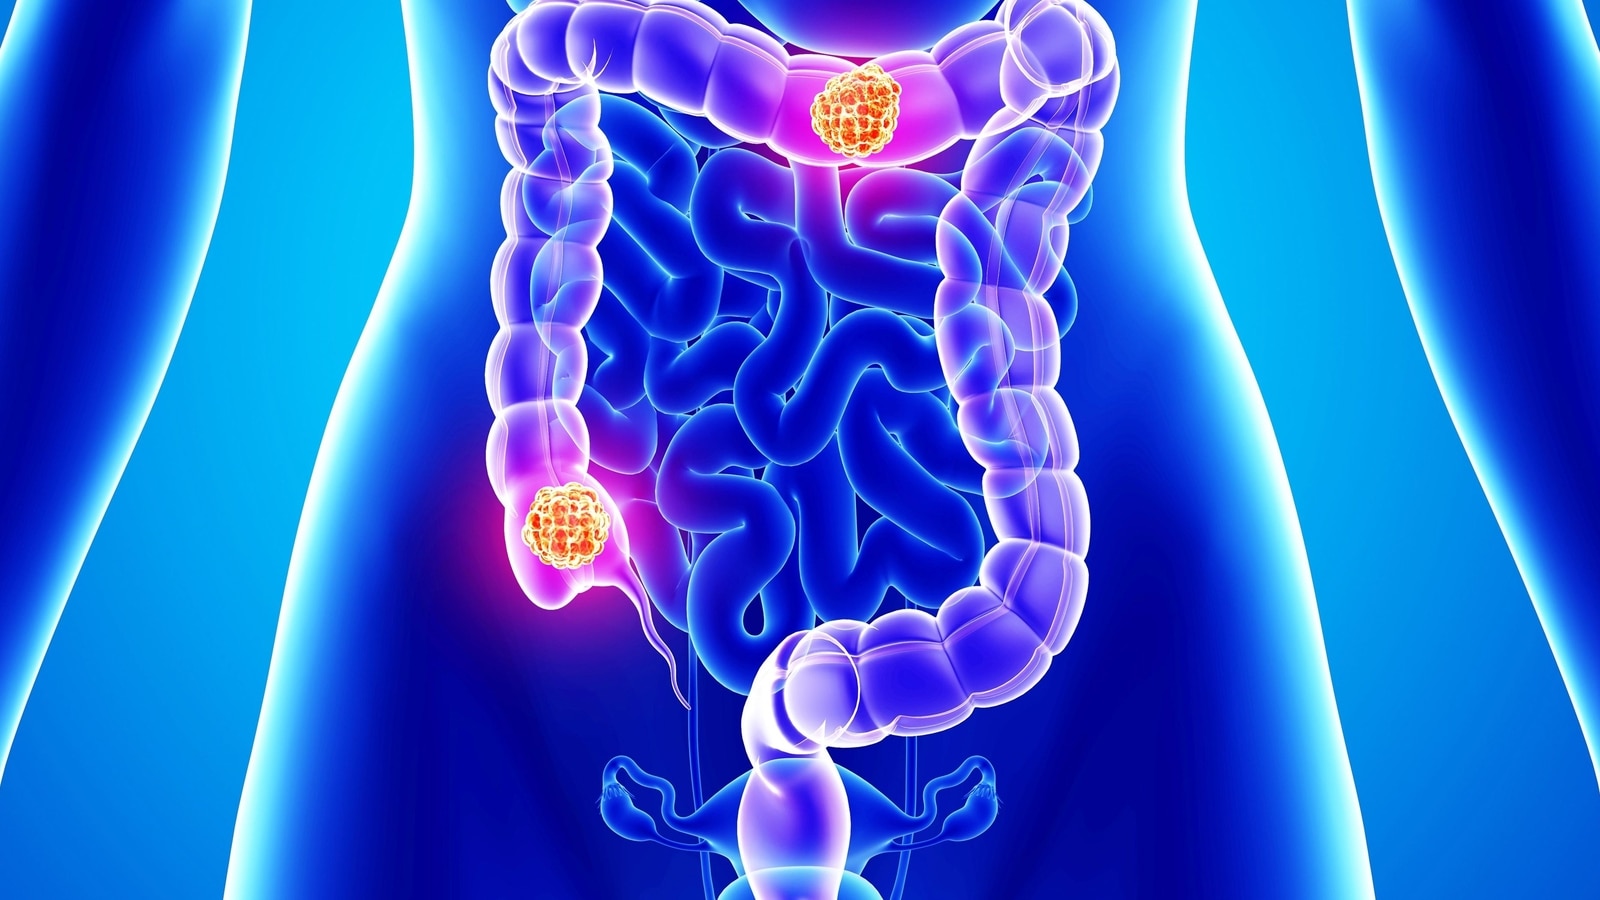 Doctors share health tips to keep colorectal cancer (CRC) risks at bay | Health